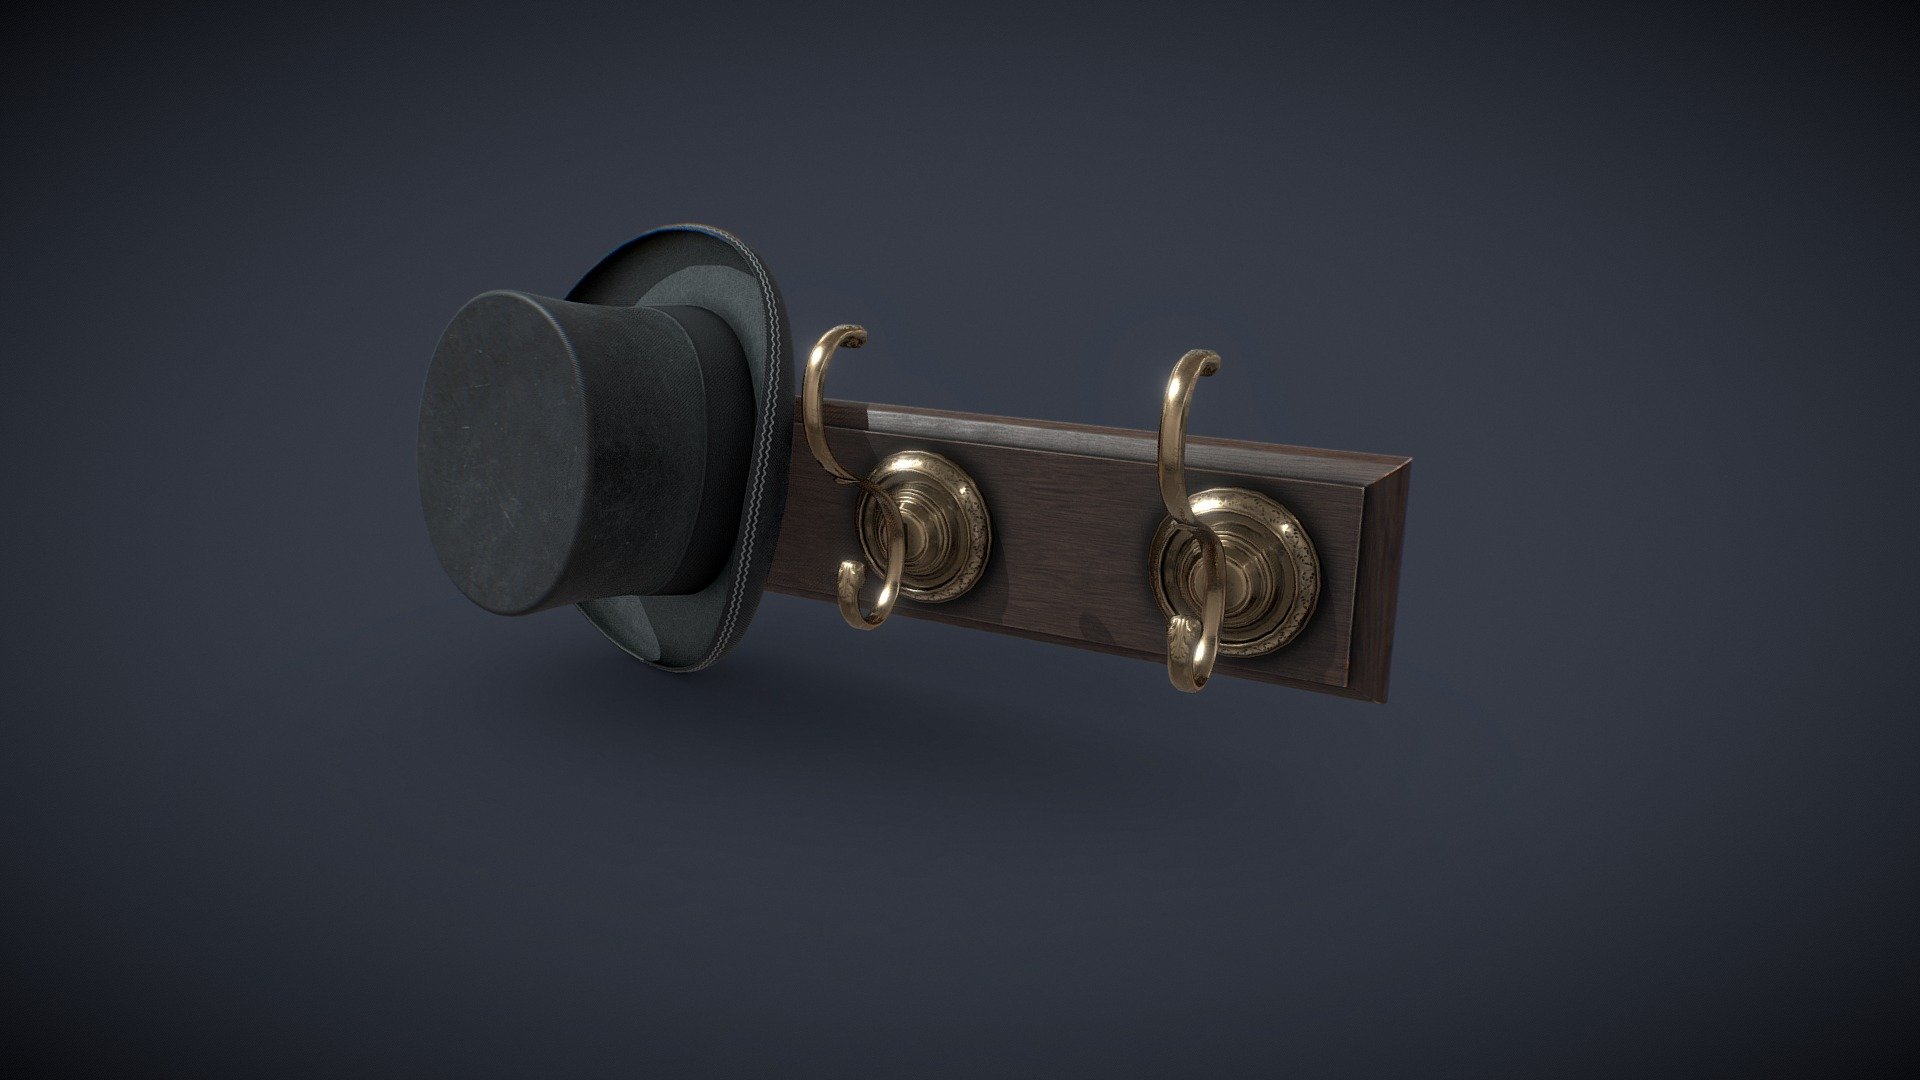 Hi all :) A new asset for a victorian project, this is a small hat stand to hang clothes :)

Made with Maya, PS and Substance.

You will find in the package Scene file, FBX and 2k Textures.
If you have any customs need, please feel free to contact me 3d model